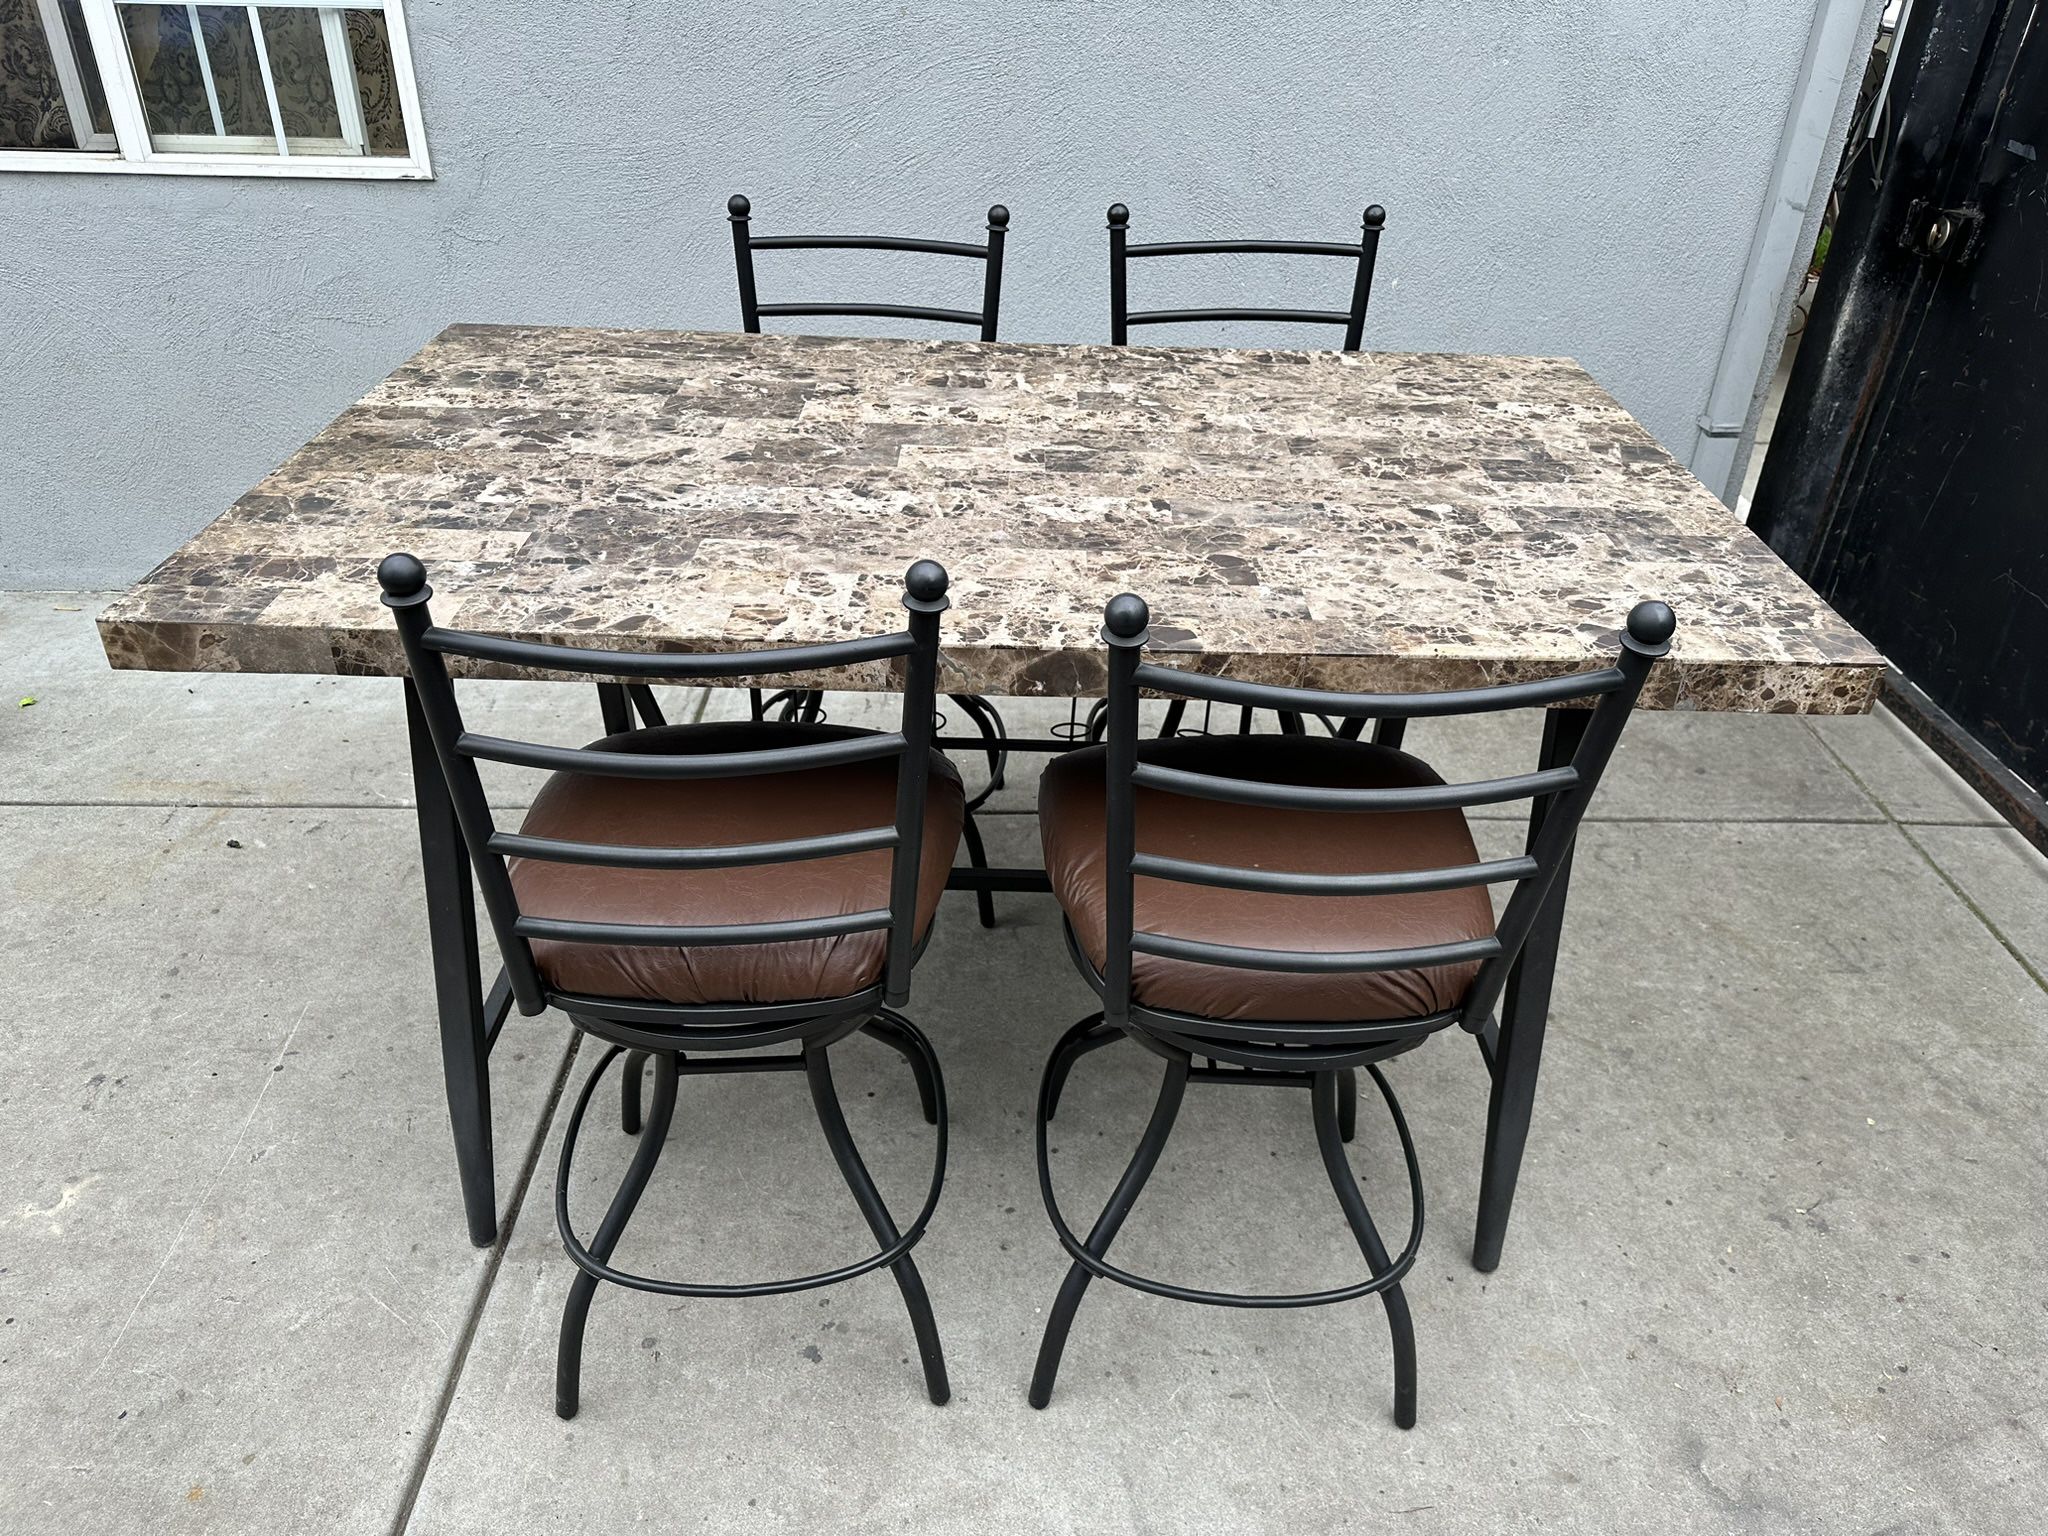 Gorgeous Tall Patio Table And 4 Swivel High Chairs